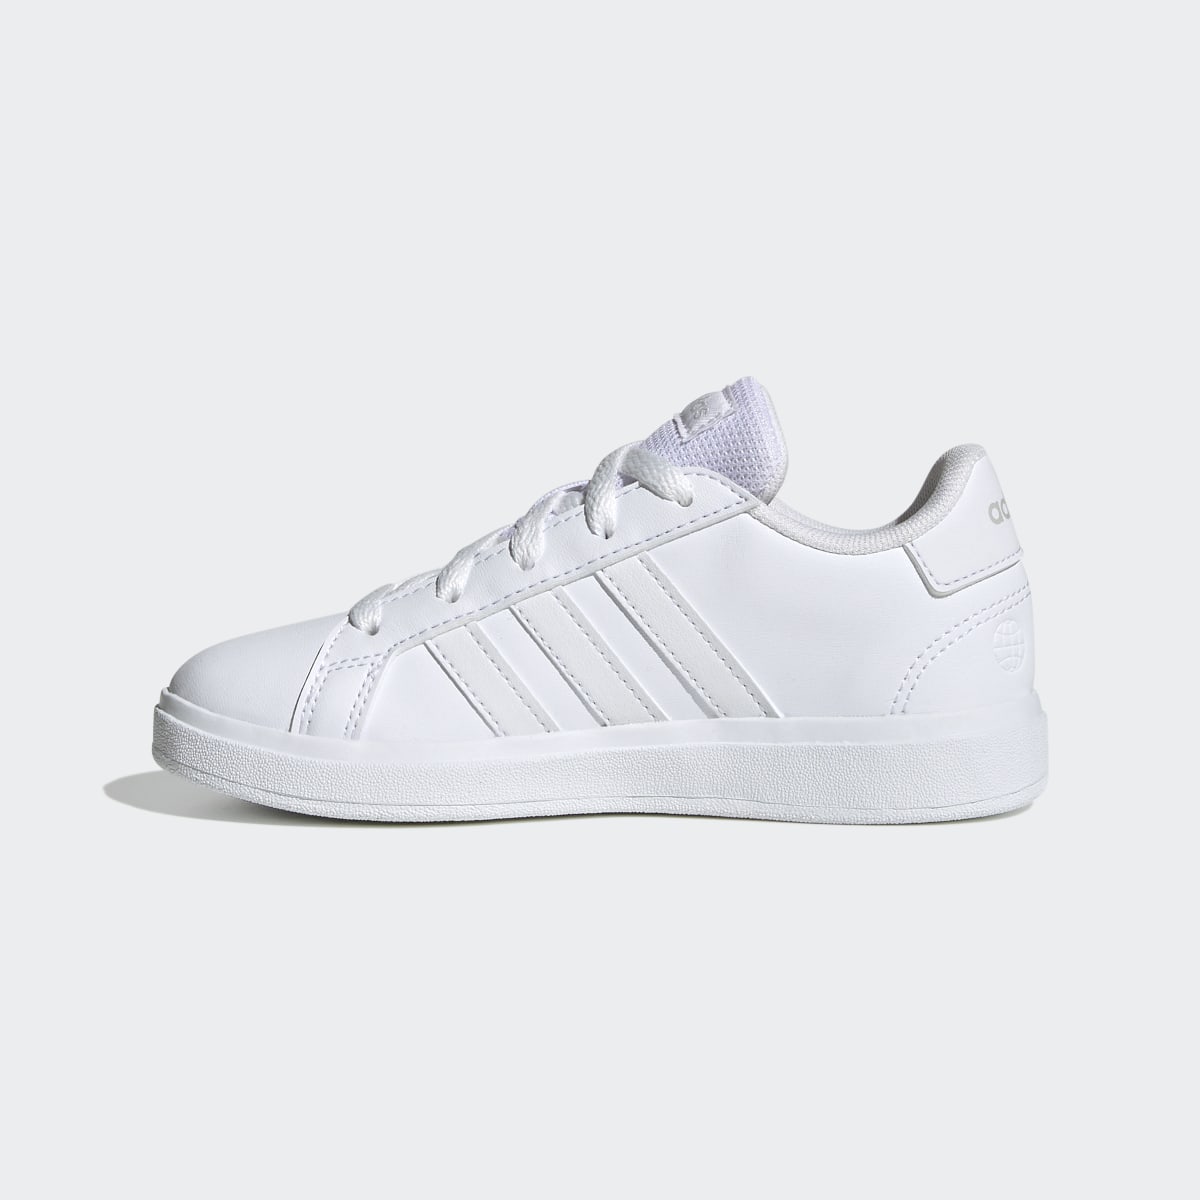 Adidas Grand Court Lifestyle Tennis Lace-Up Shoes. 7